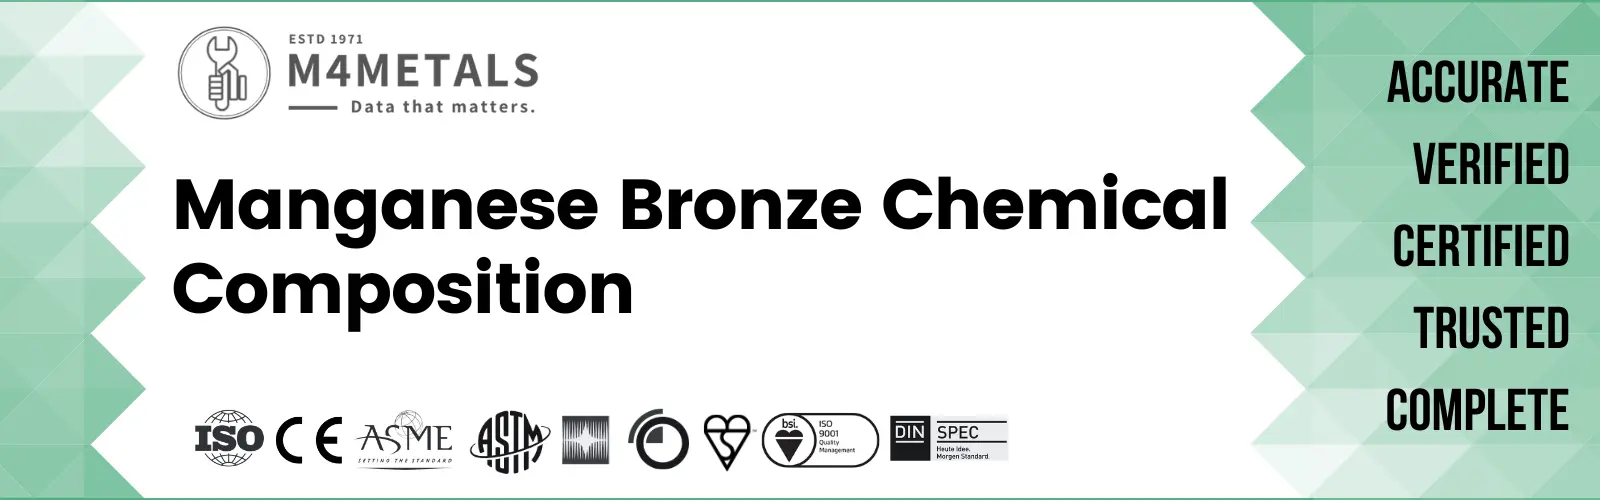 Maganese Bronze Chemical Composition